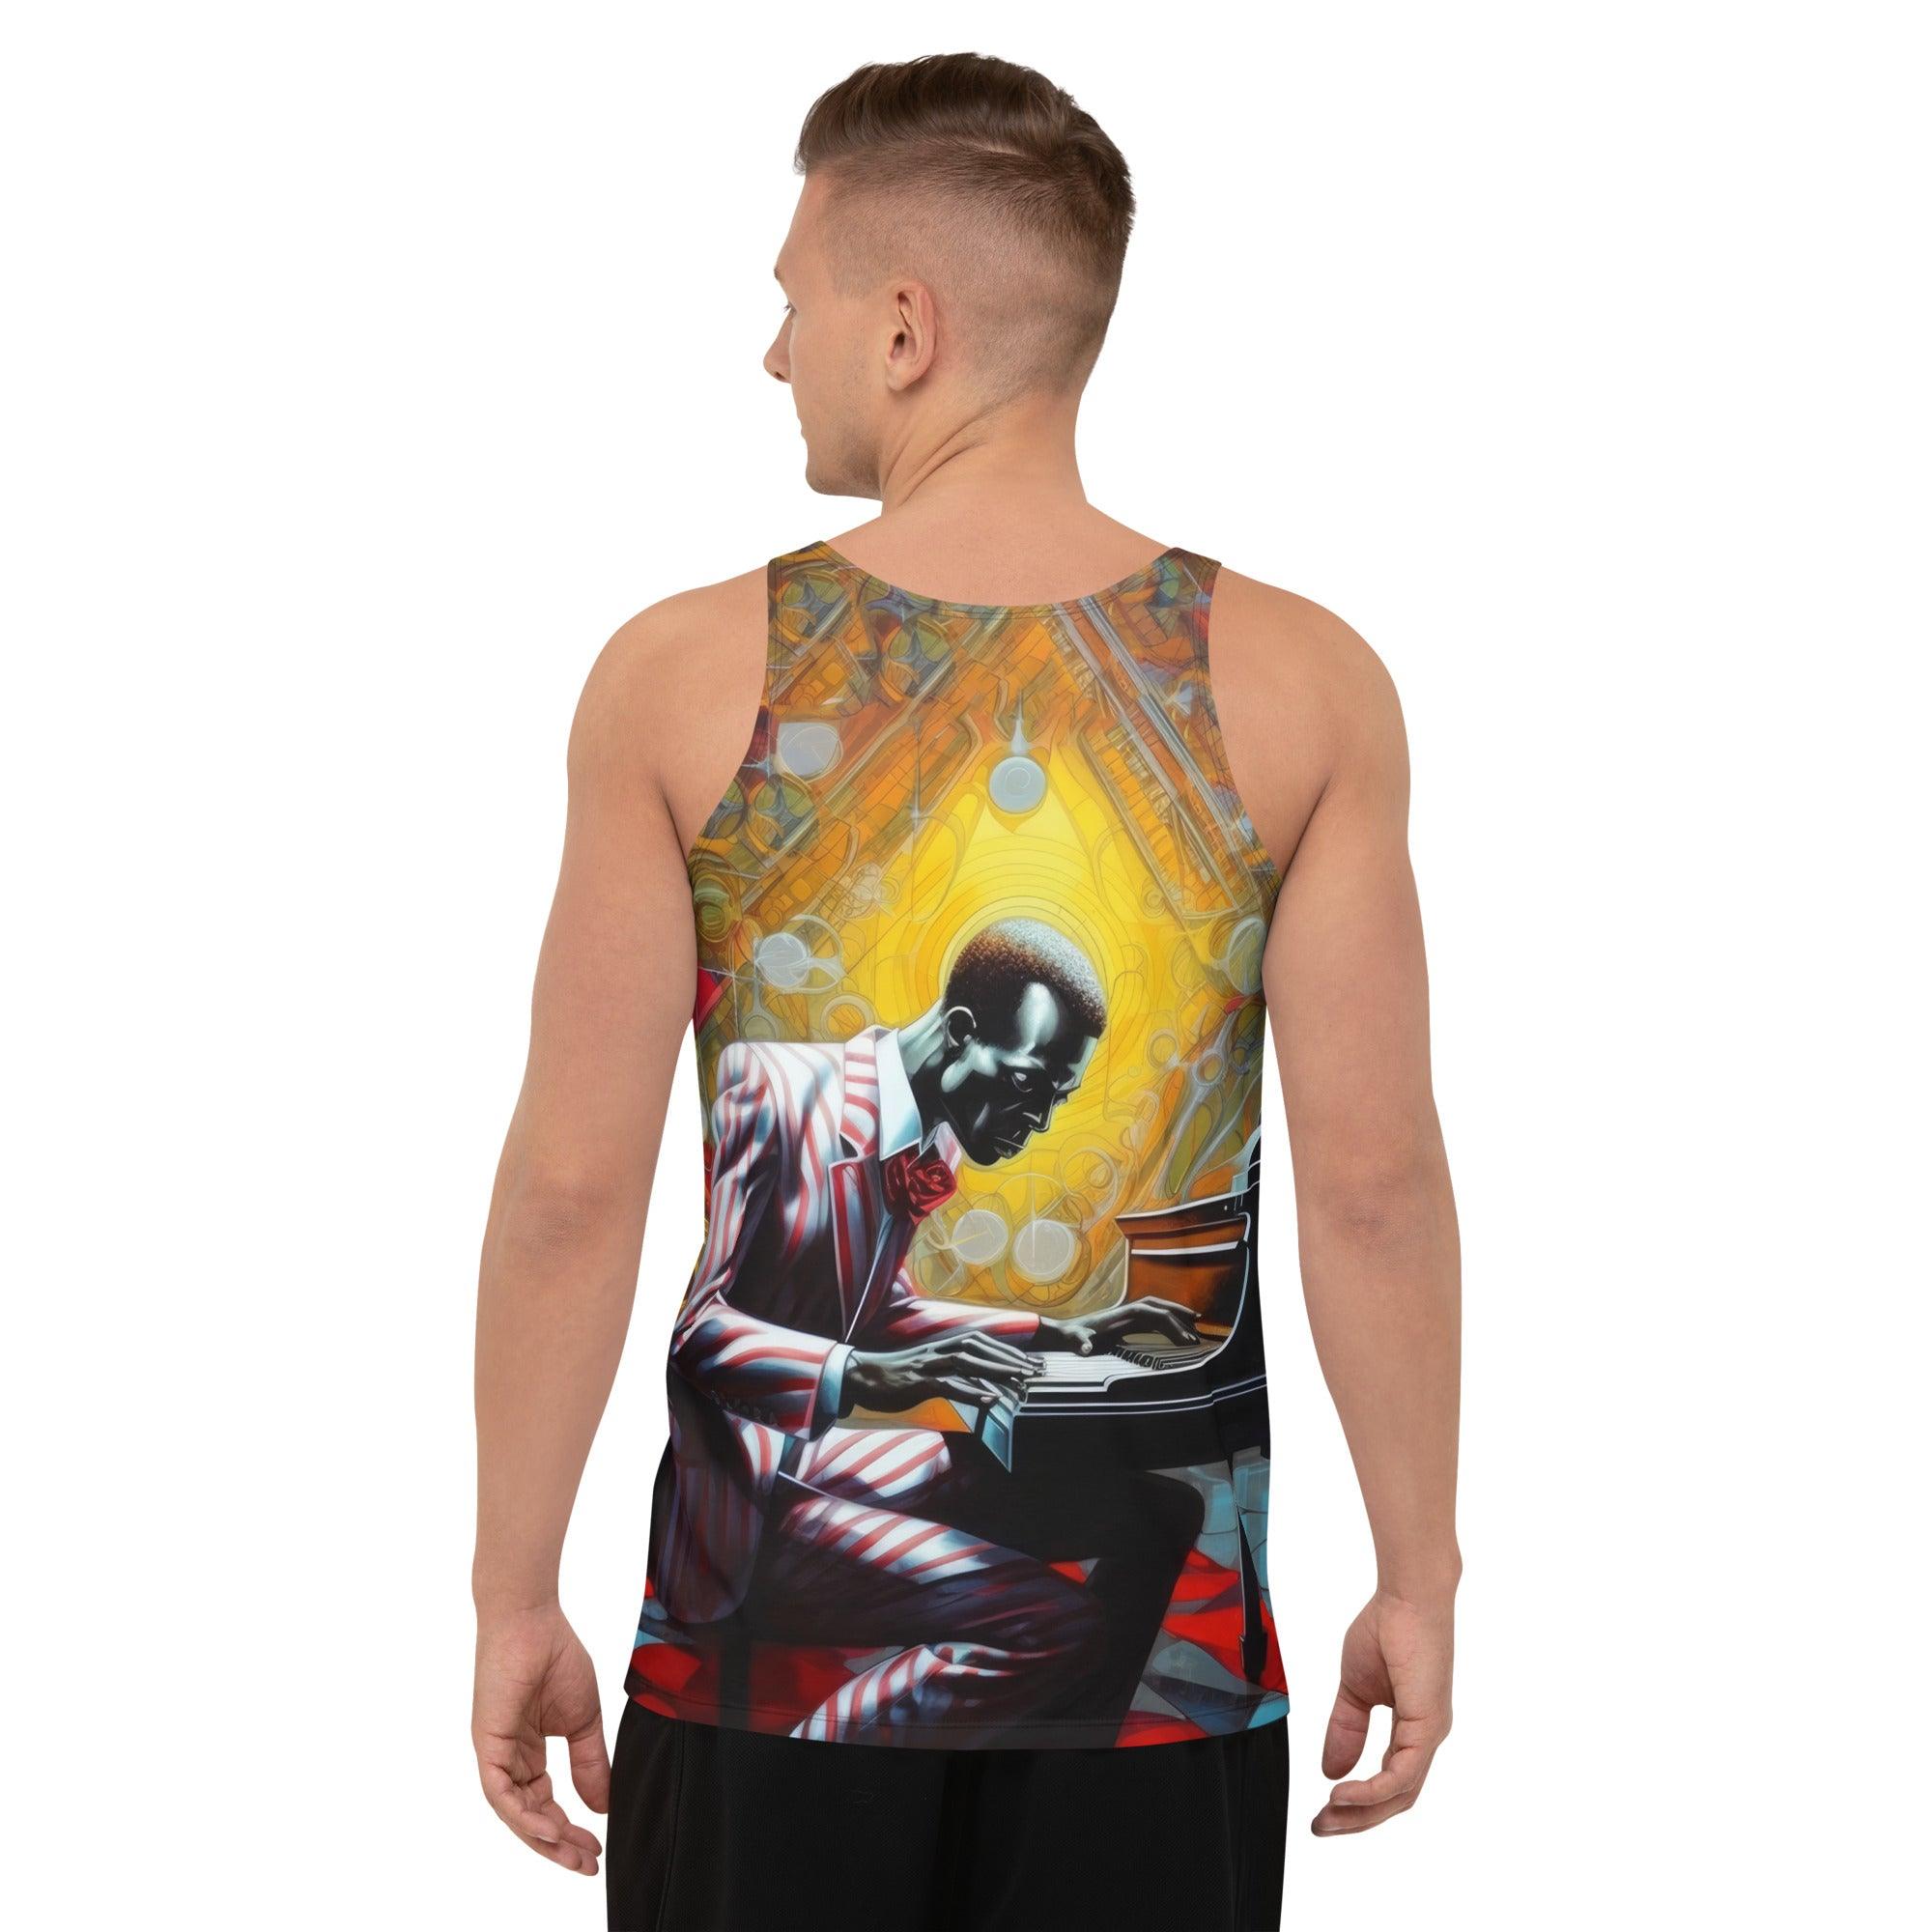 Unisex Musical Tank Top - Side View